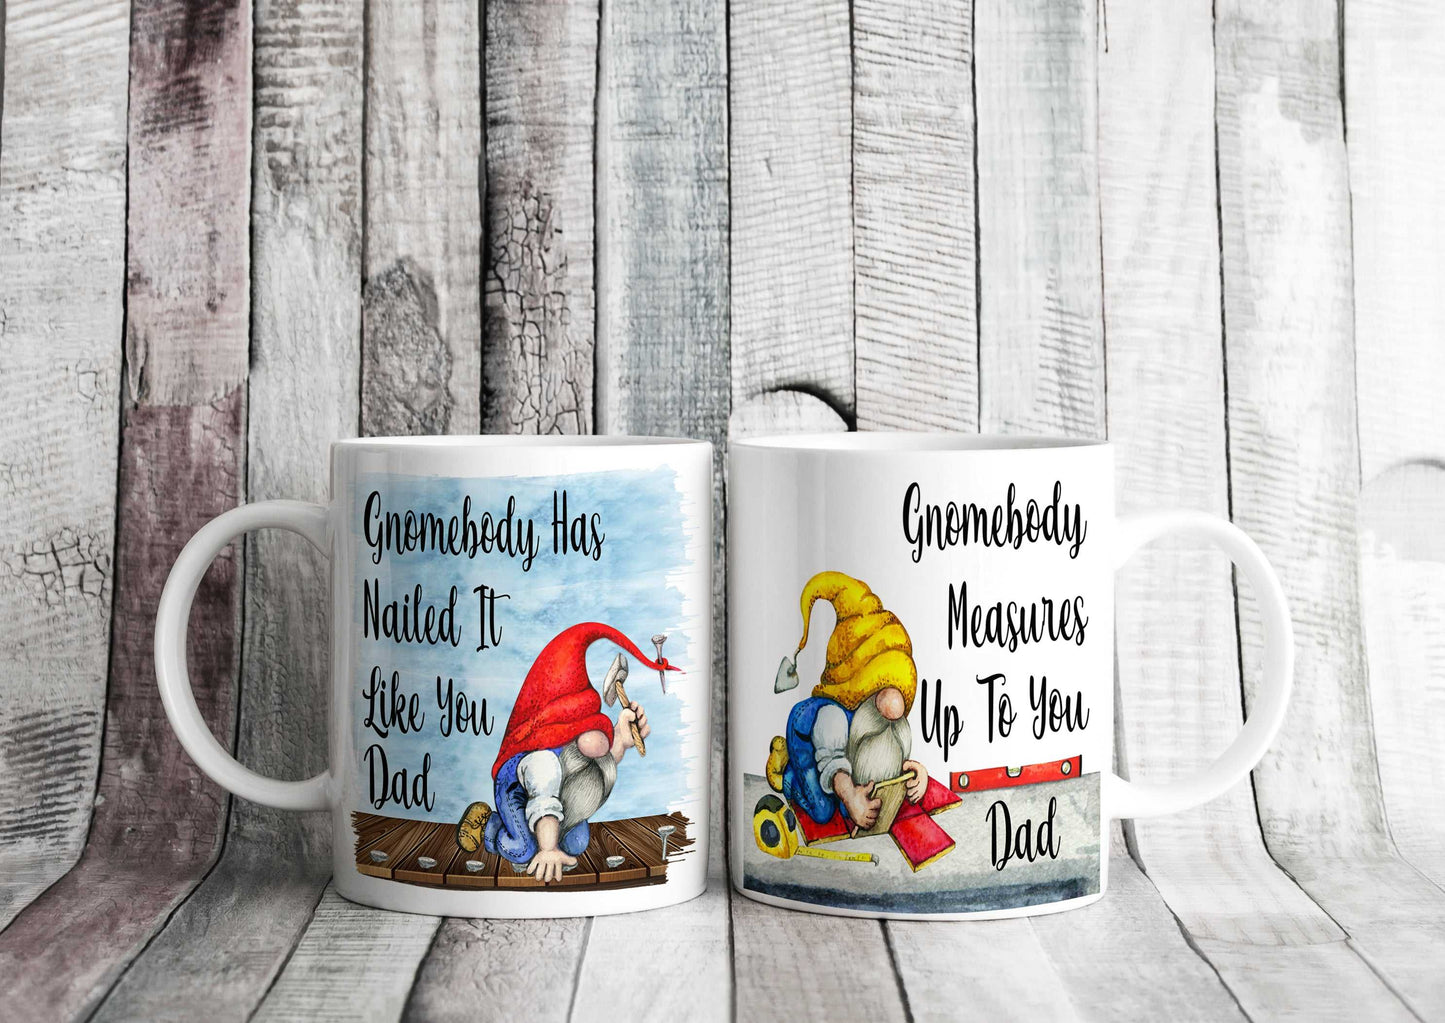  Fathers Day Gnome Mug Choice of 2 Designs by Free Spirit Accessories sold by Free Spirit Accessories